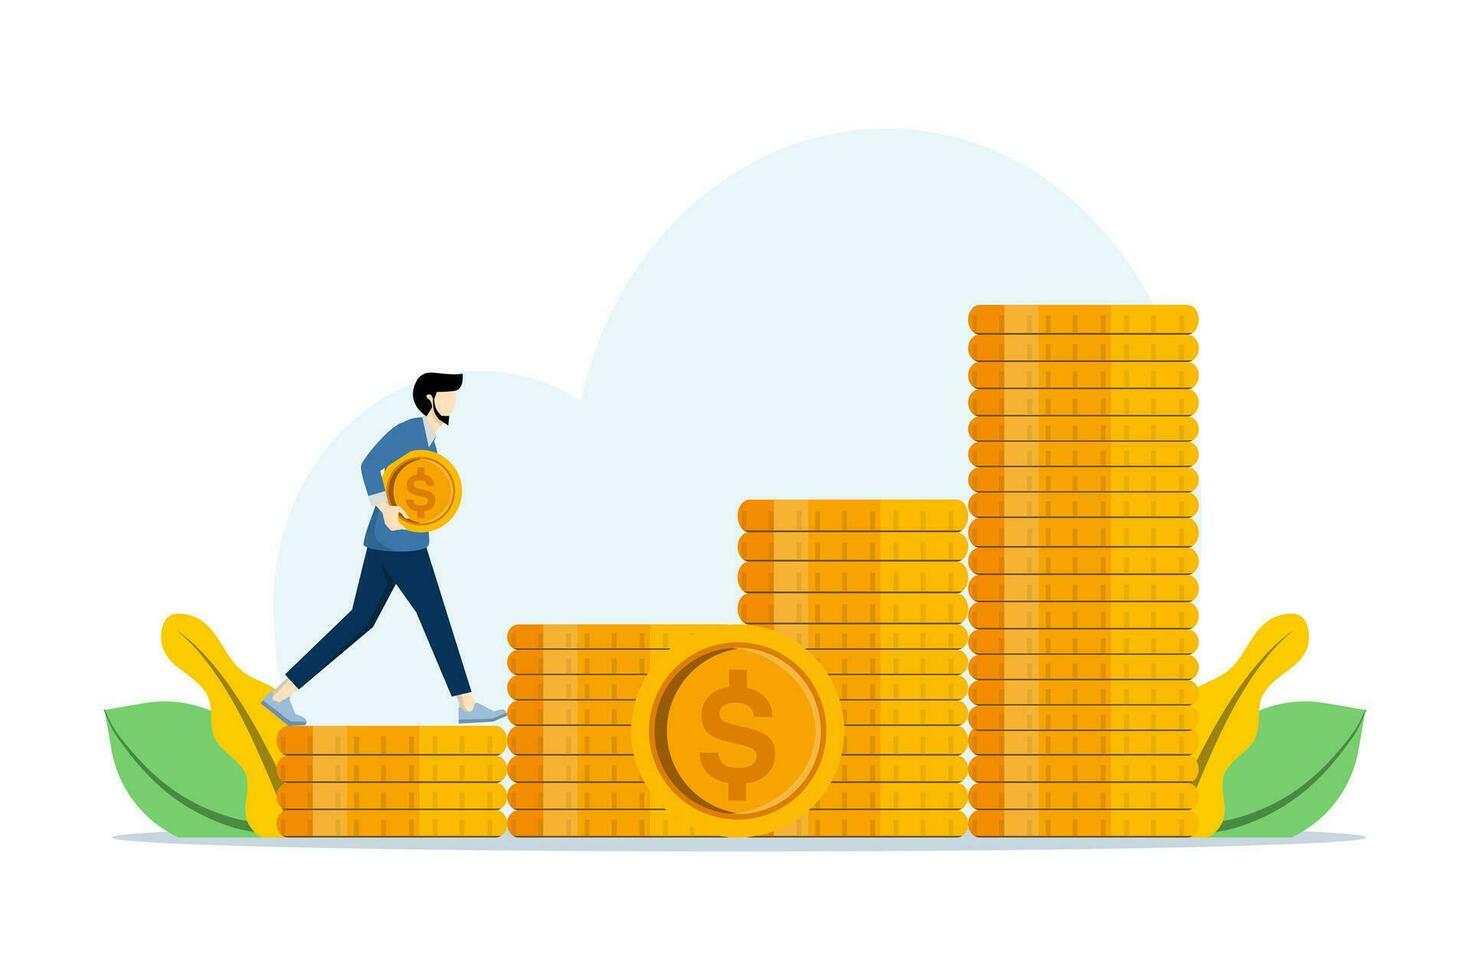 Financial Wealth Concept, a man carrying coins, making Money, Increasing Income, Saving. Investment Expert Increases Profits, flat vector illustration on a white background.